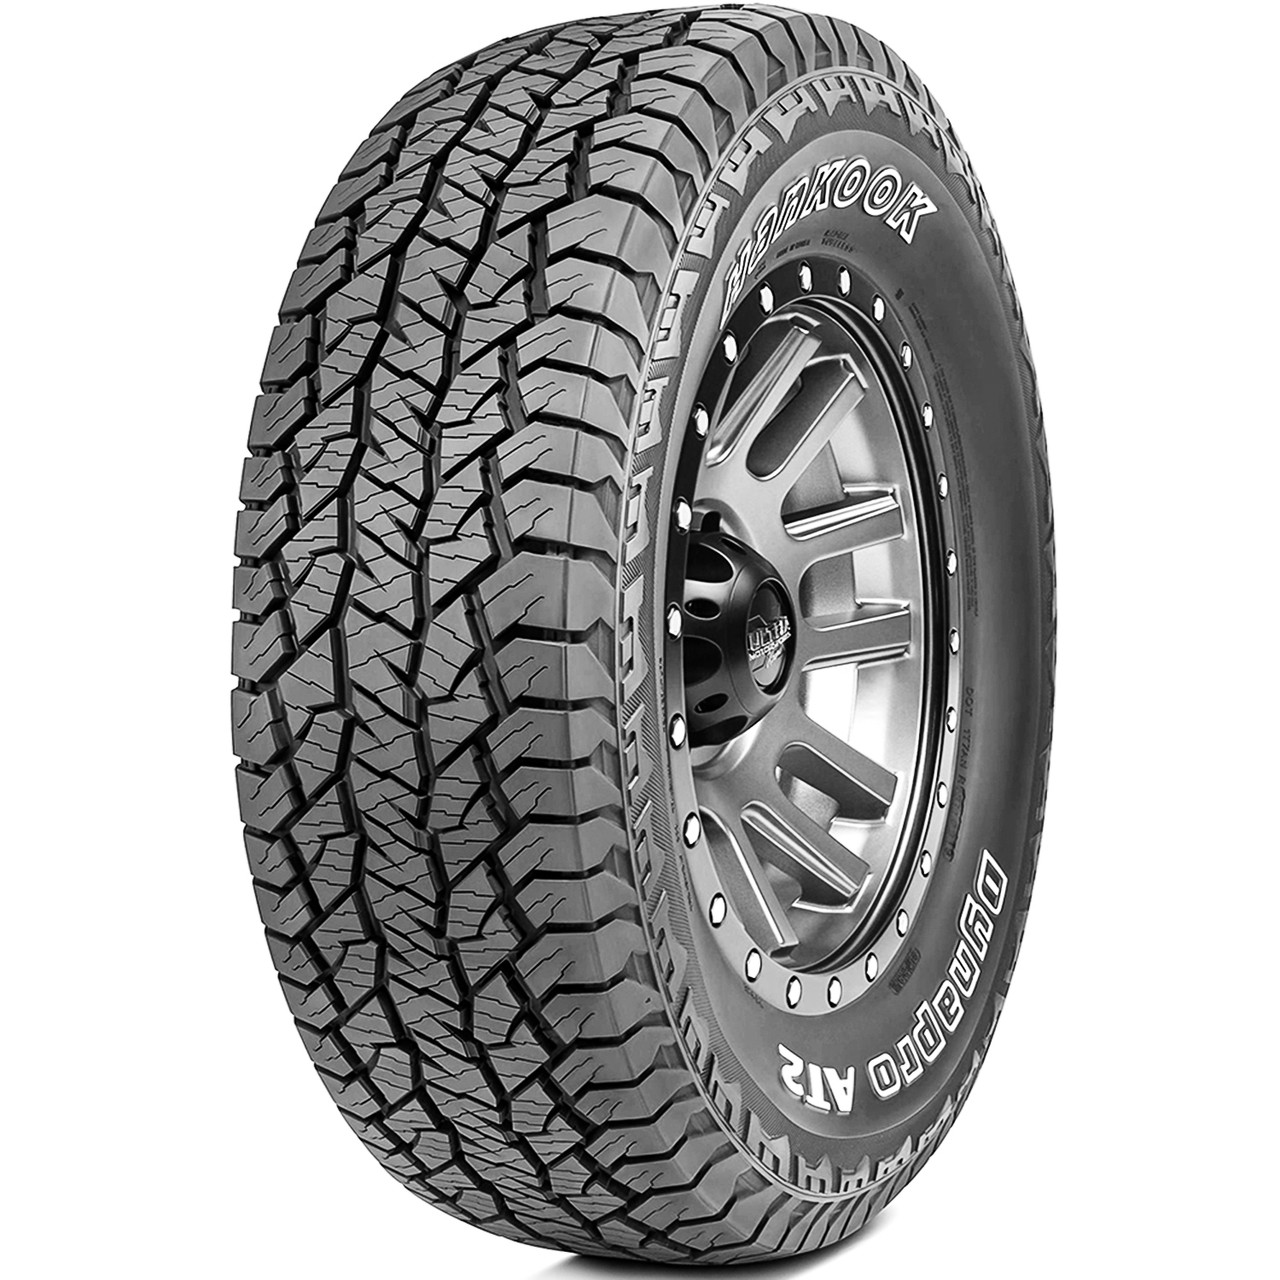 Photos - Motorcycle Tyre Hankook Dynapro AT2 245/75R17, All Season, All Terrain tires. 